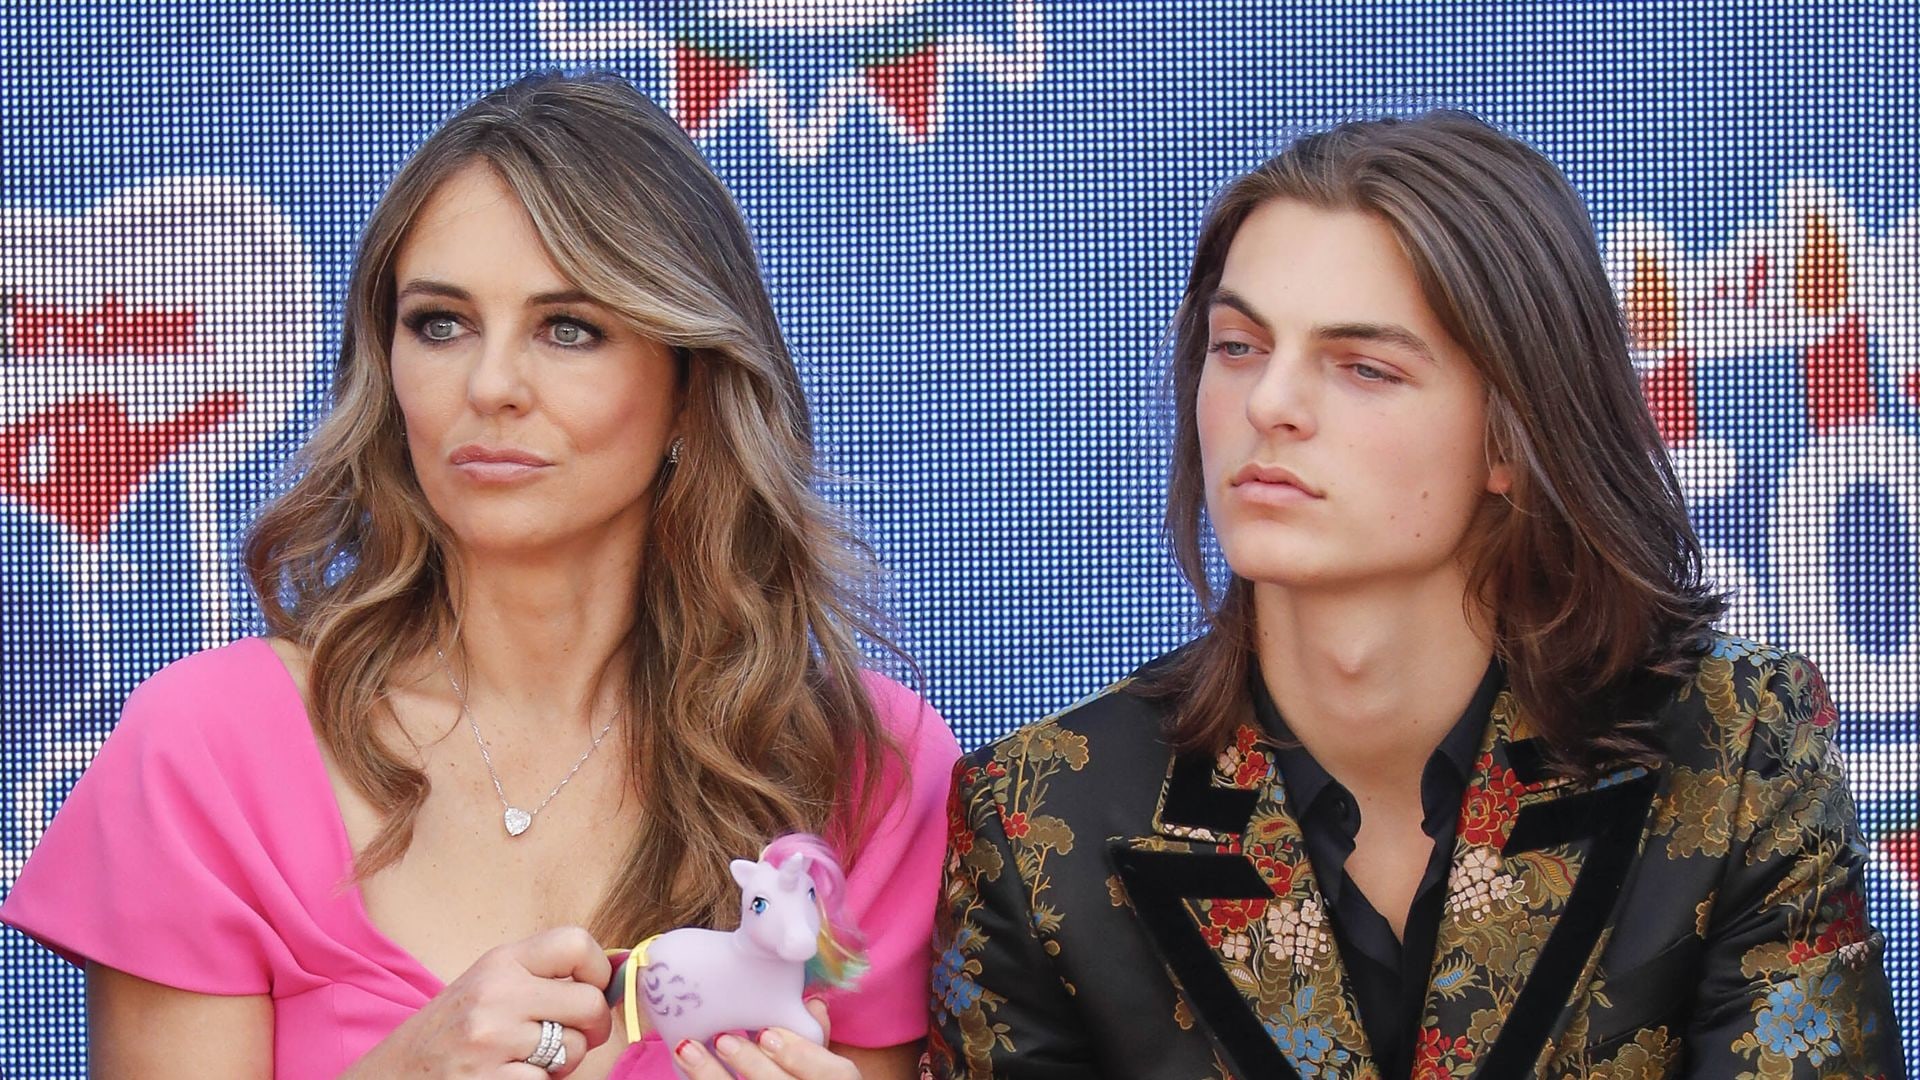 Elizabeth Hurley in pink dress with Damian Hurley, both expressionless